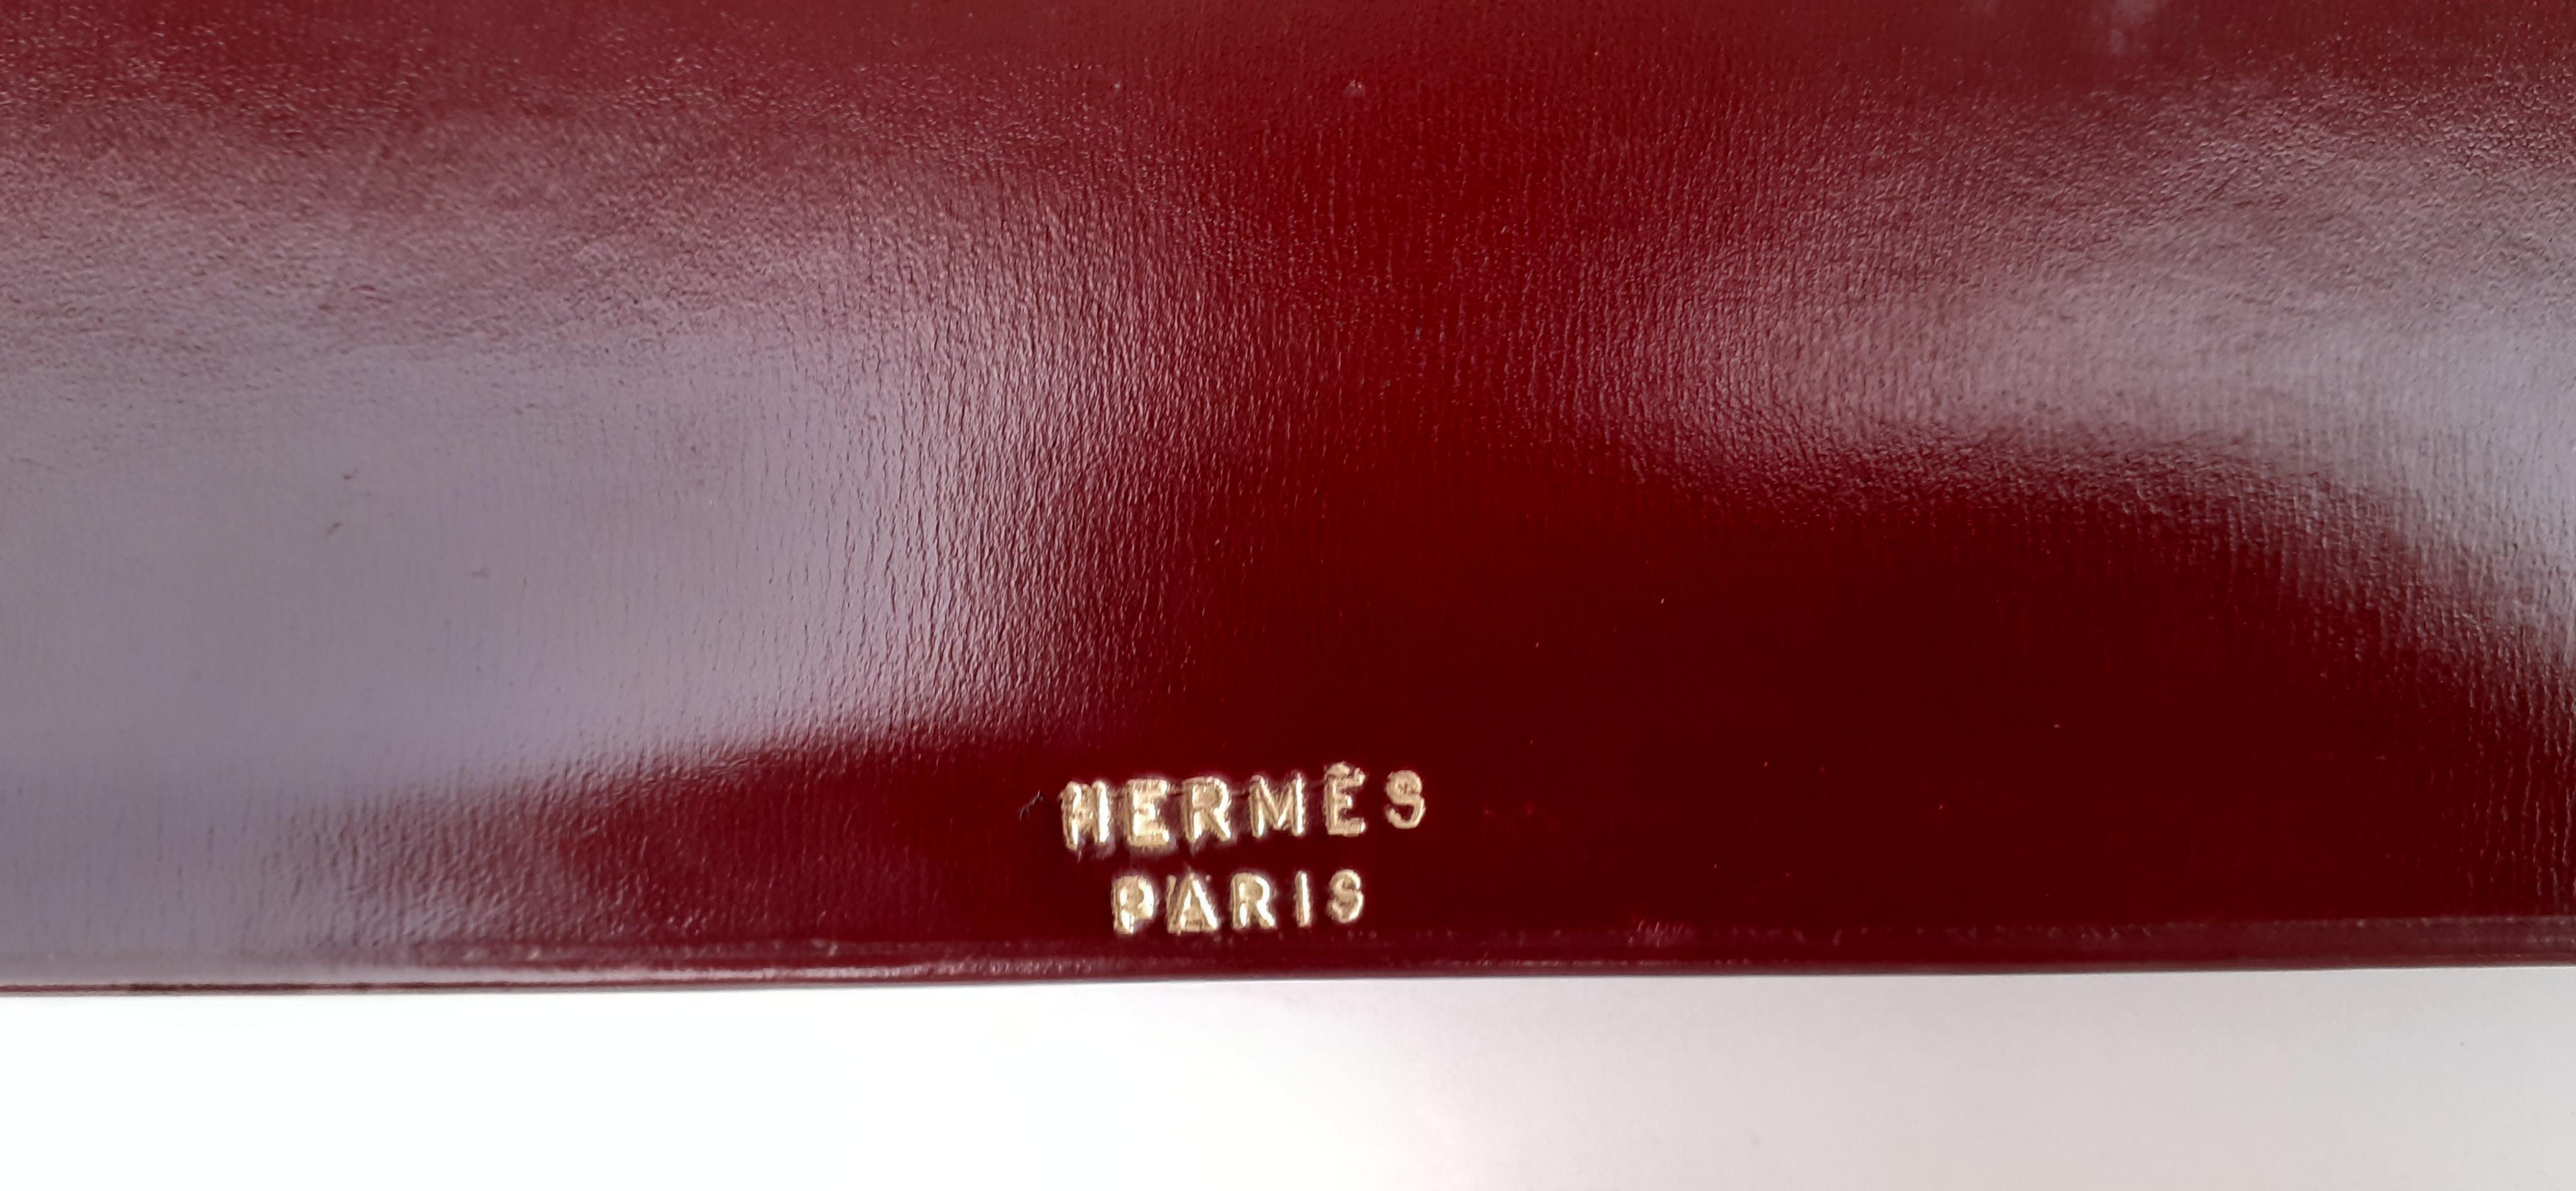 Black Exceptional Hermès Centerpiece Seating Plan 12 People Rouge H Leather RARE For Sale